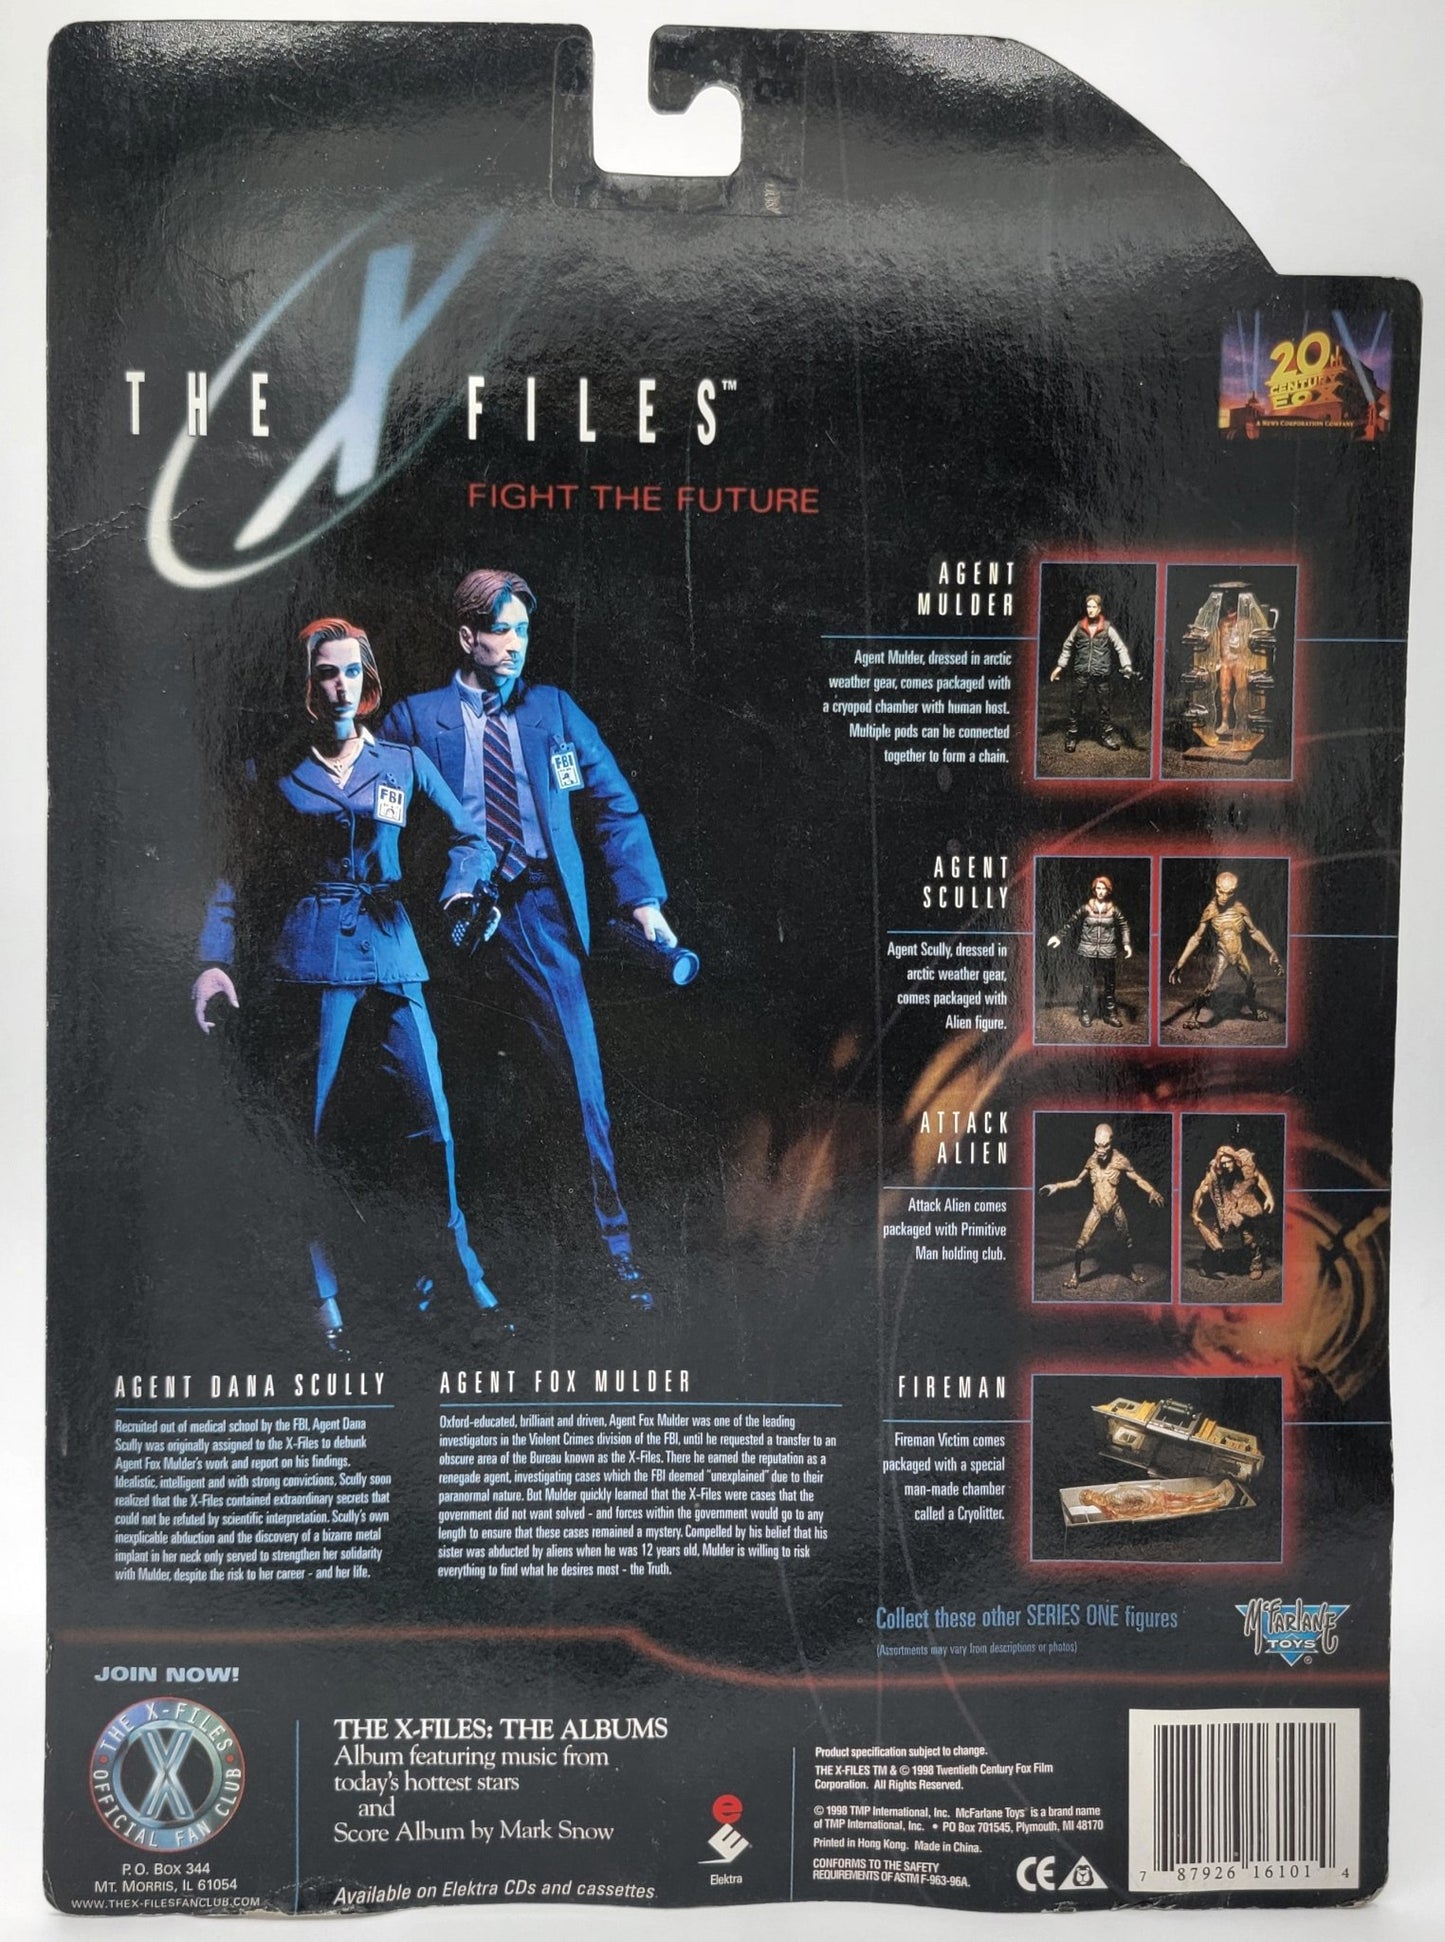 McFarlane's Toys - The X-Files - Agent Fox Mulder 1998 - Series 1 | Todd McFarlane | Vintage Action Figure - Action Figures - Steady Bunny Shop